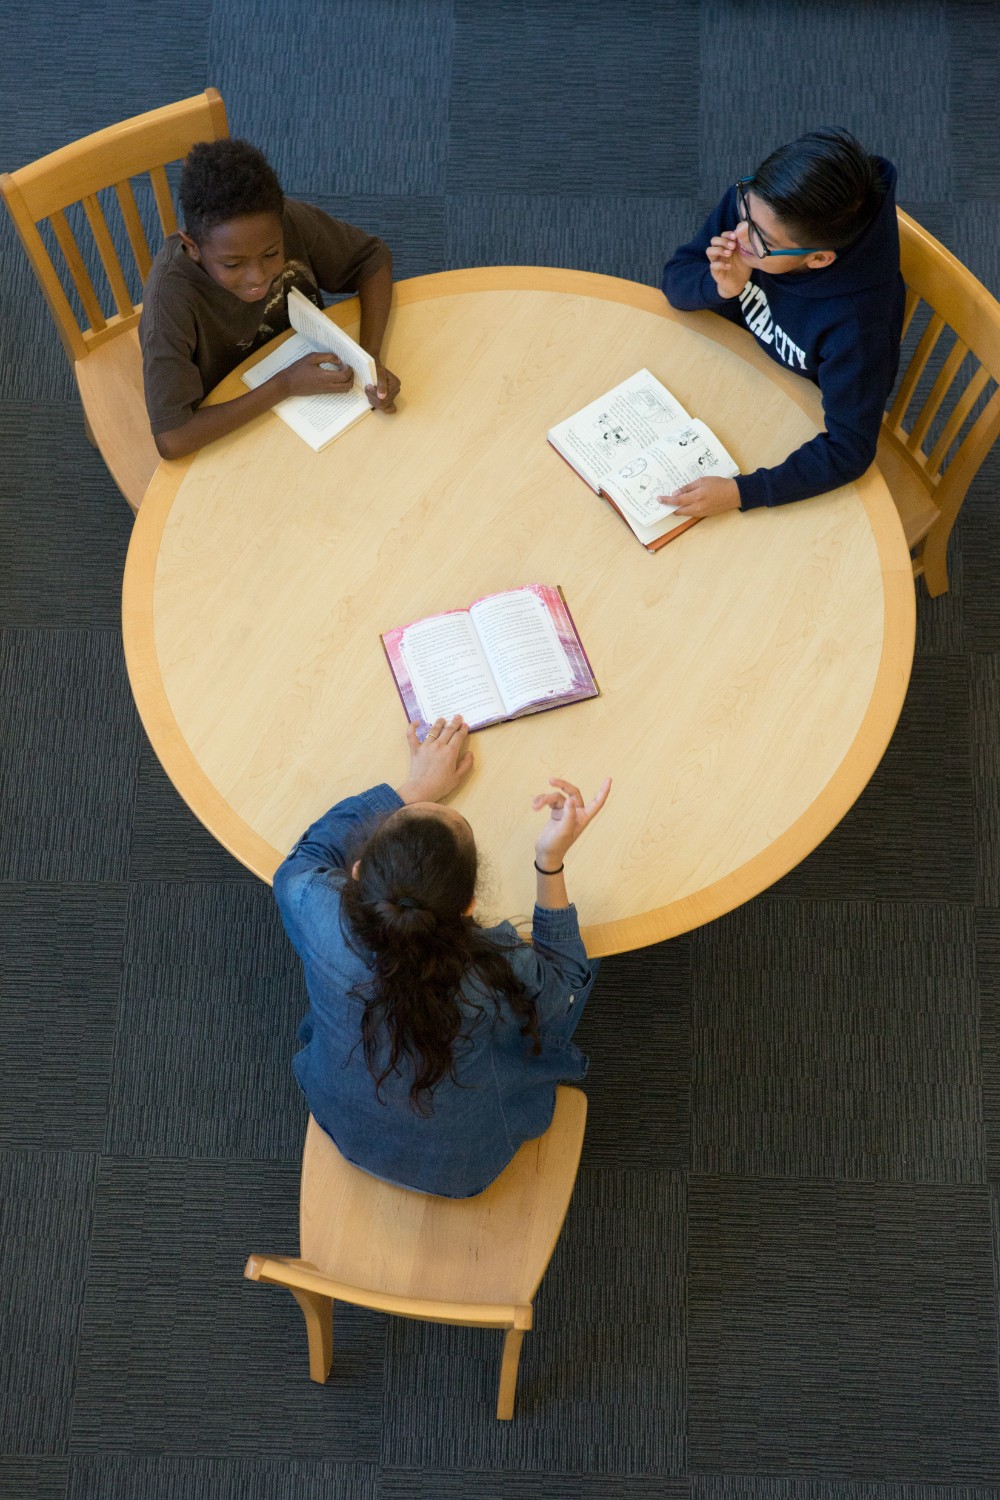 students reading at a table together